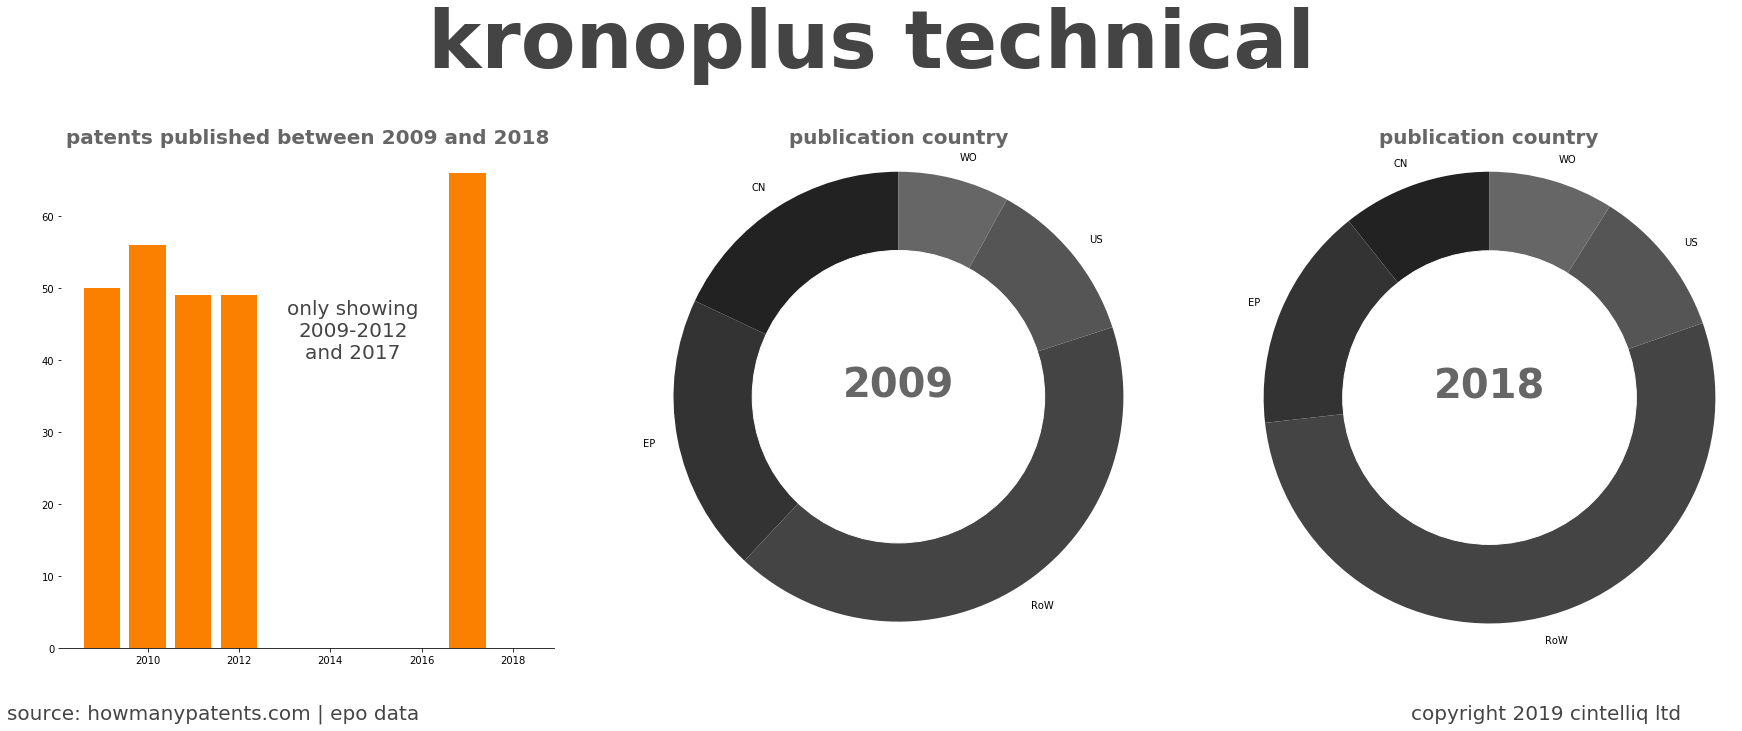 summary of patents for Kronoplus Technical